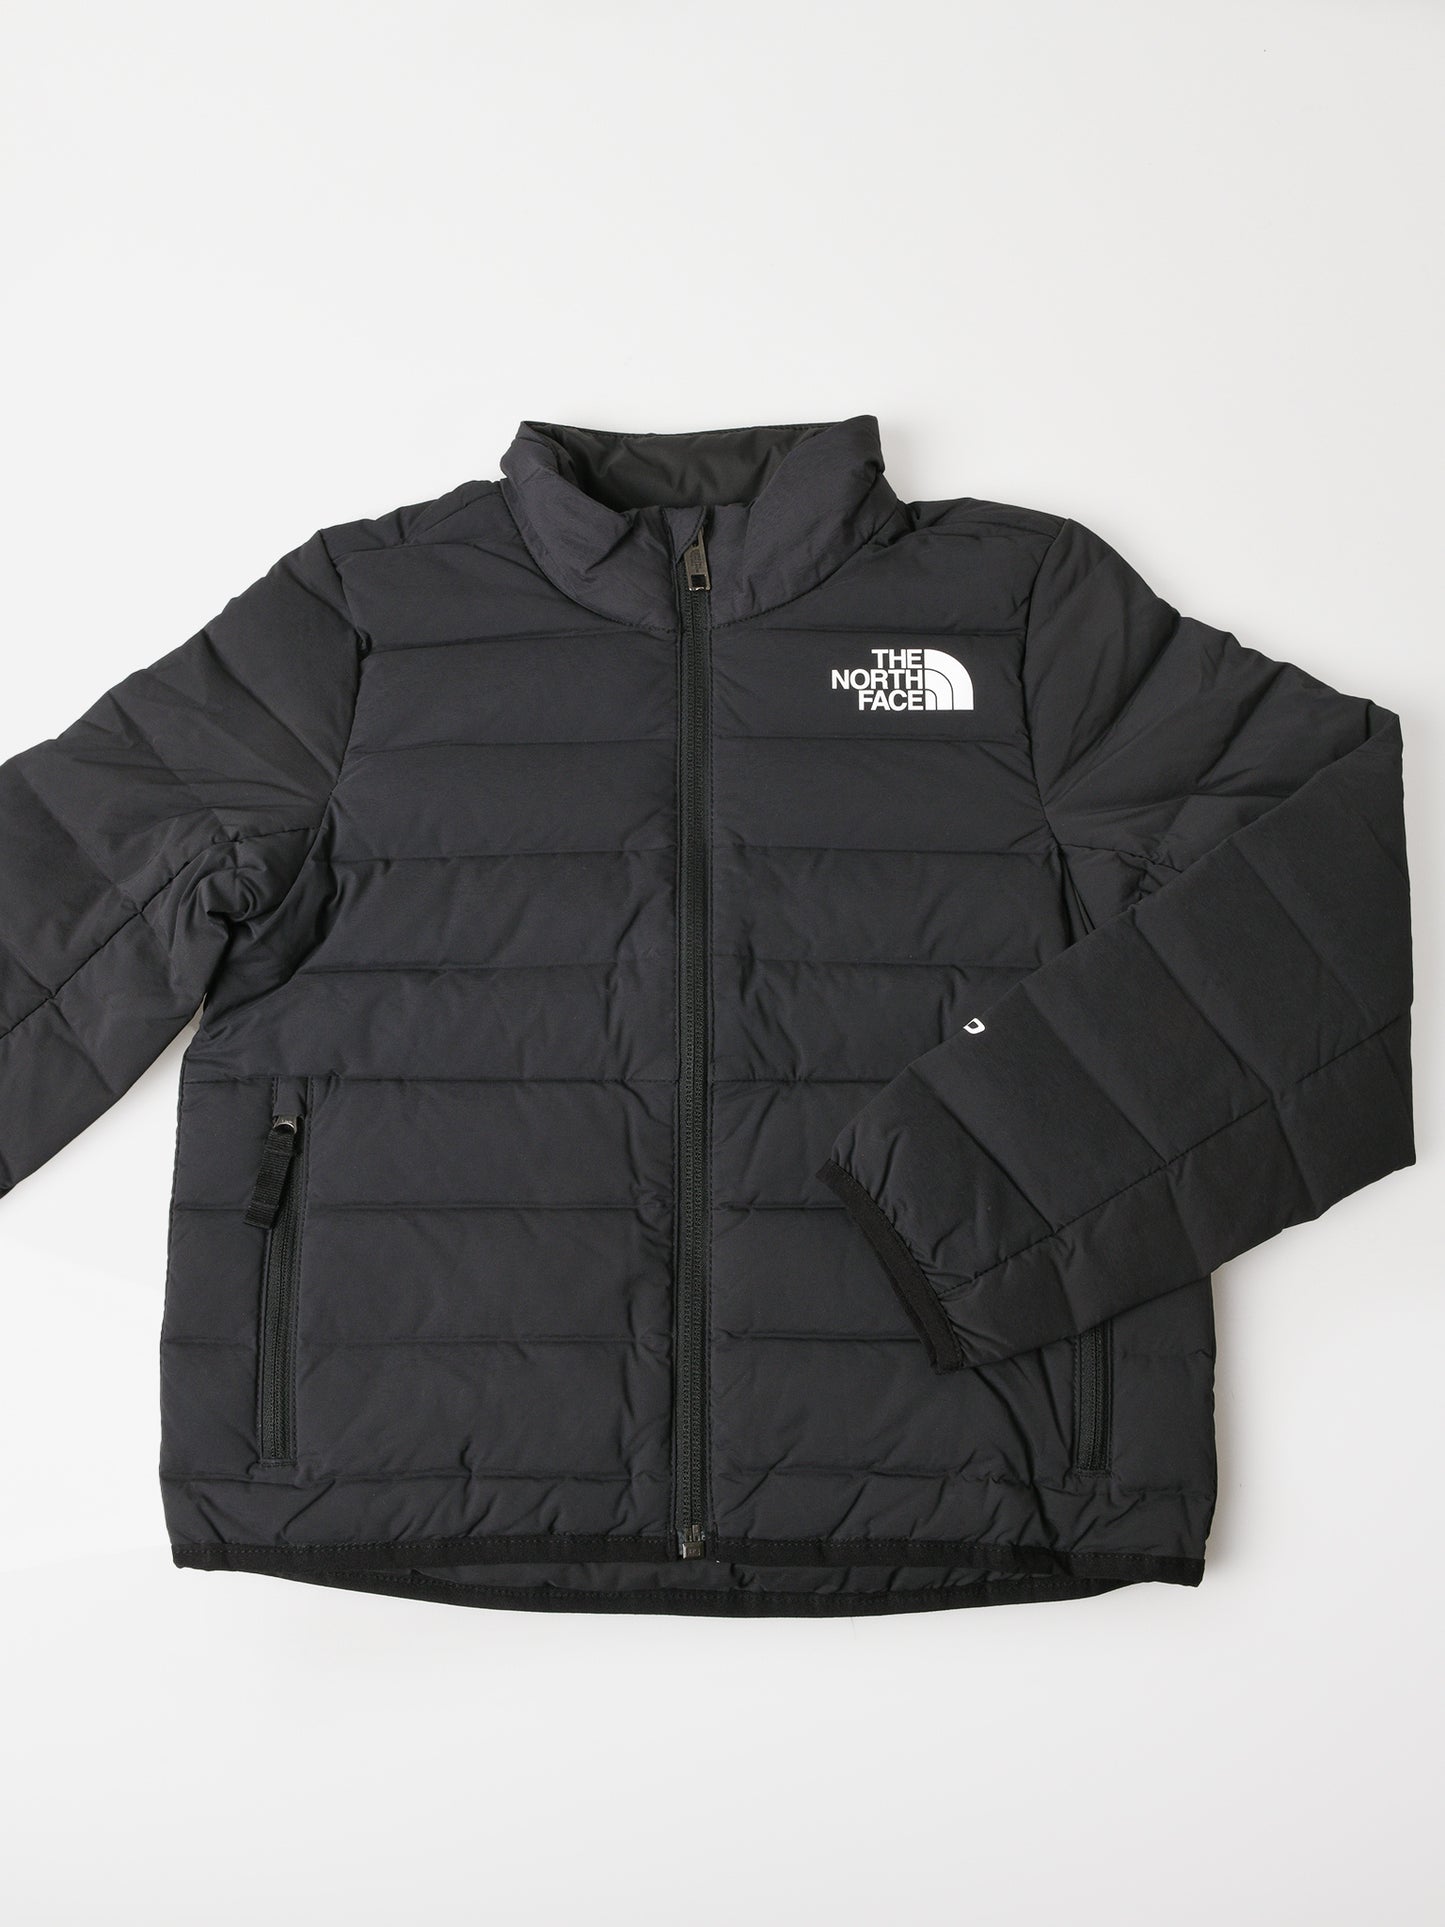 The North Face Boys’ Belleview Stretch Down Jacket